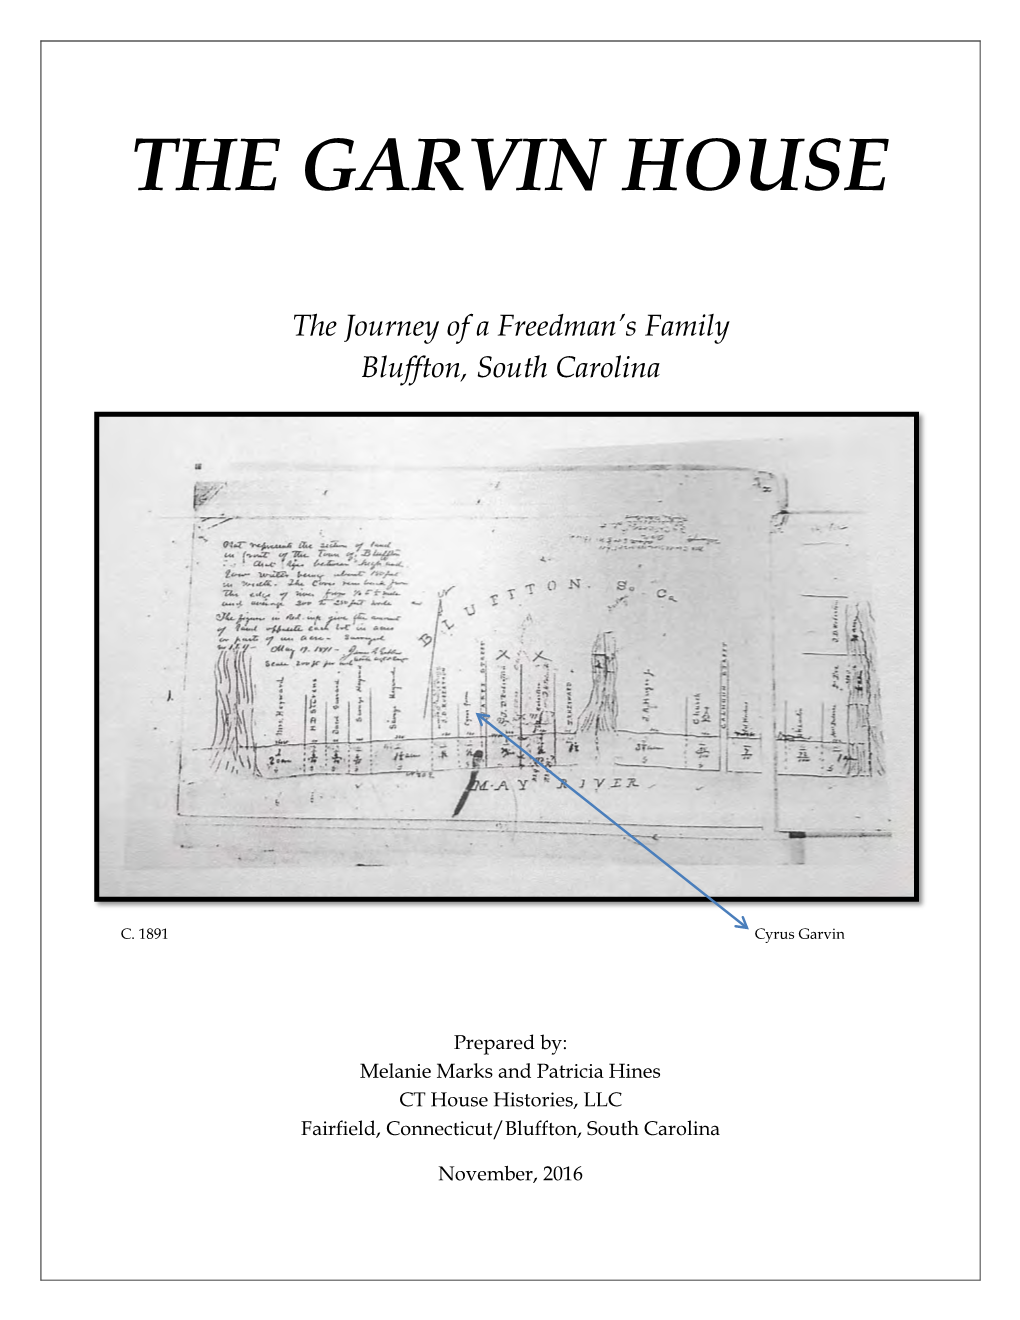 The Garvin House